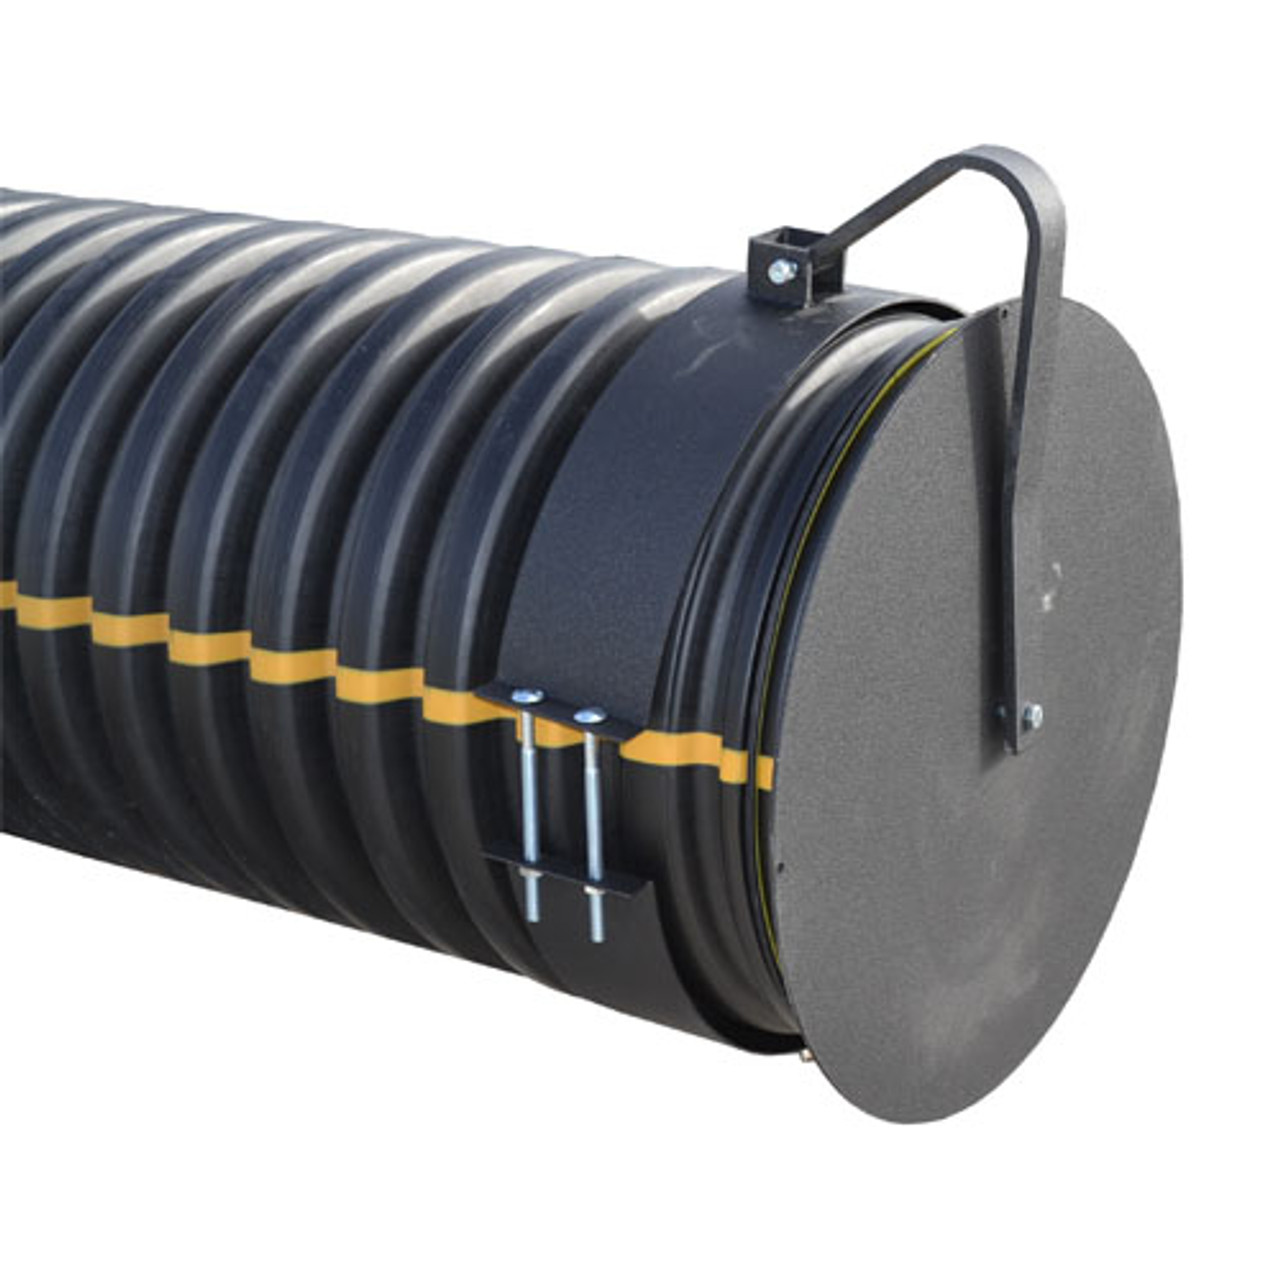 Flap Gate 24" for Corrugated Plastic Pipe The Drainage Products Store